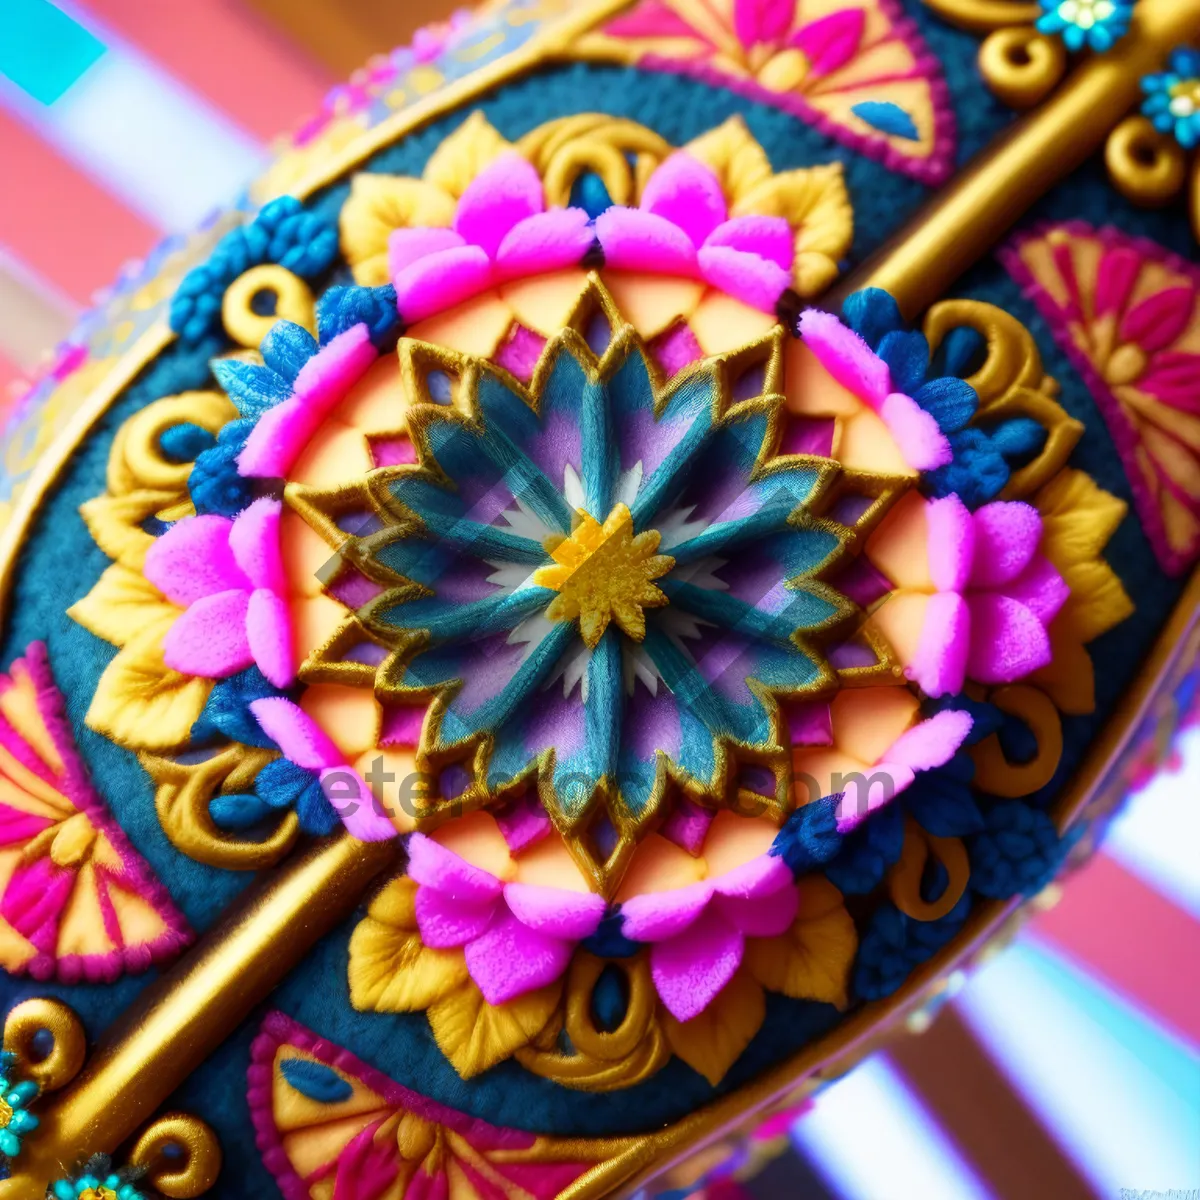 Picture of Colorful pinwheel design with modern art vibes.